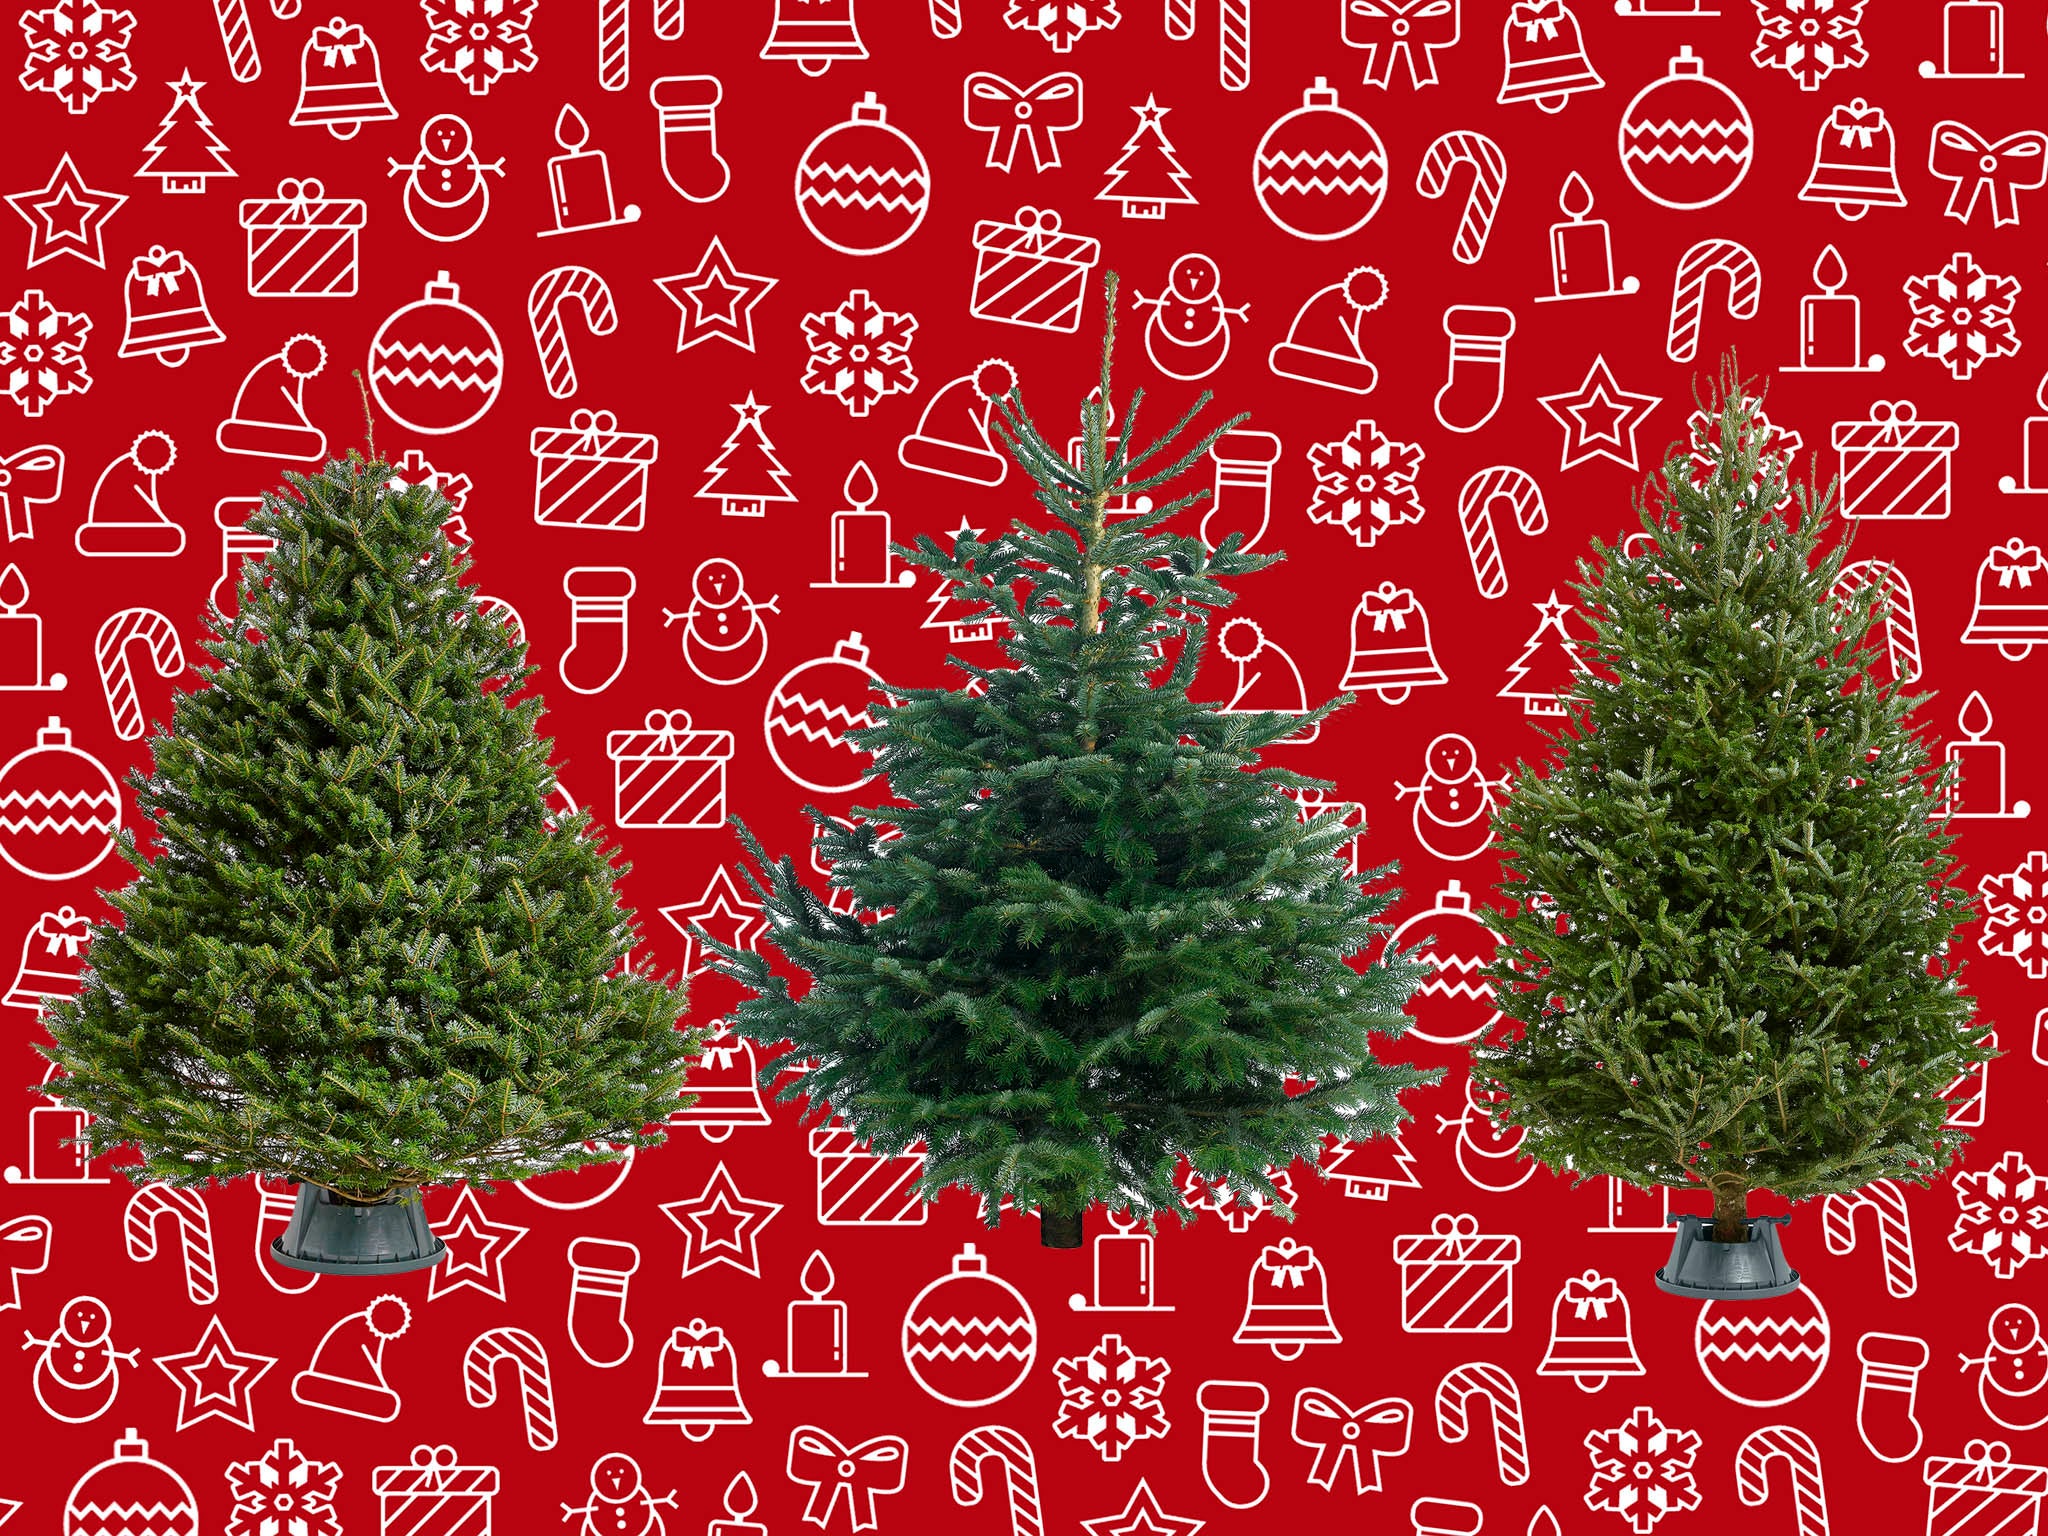 Best Real Christmas Trees That Smell Great And Don T Drop Needles The Independent,How To Declutter Kitchen